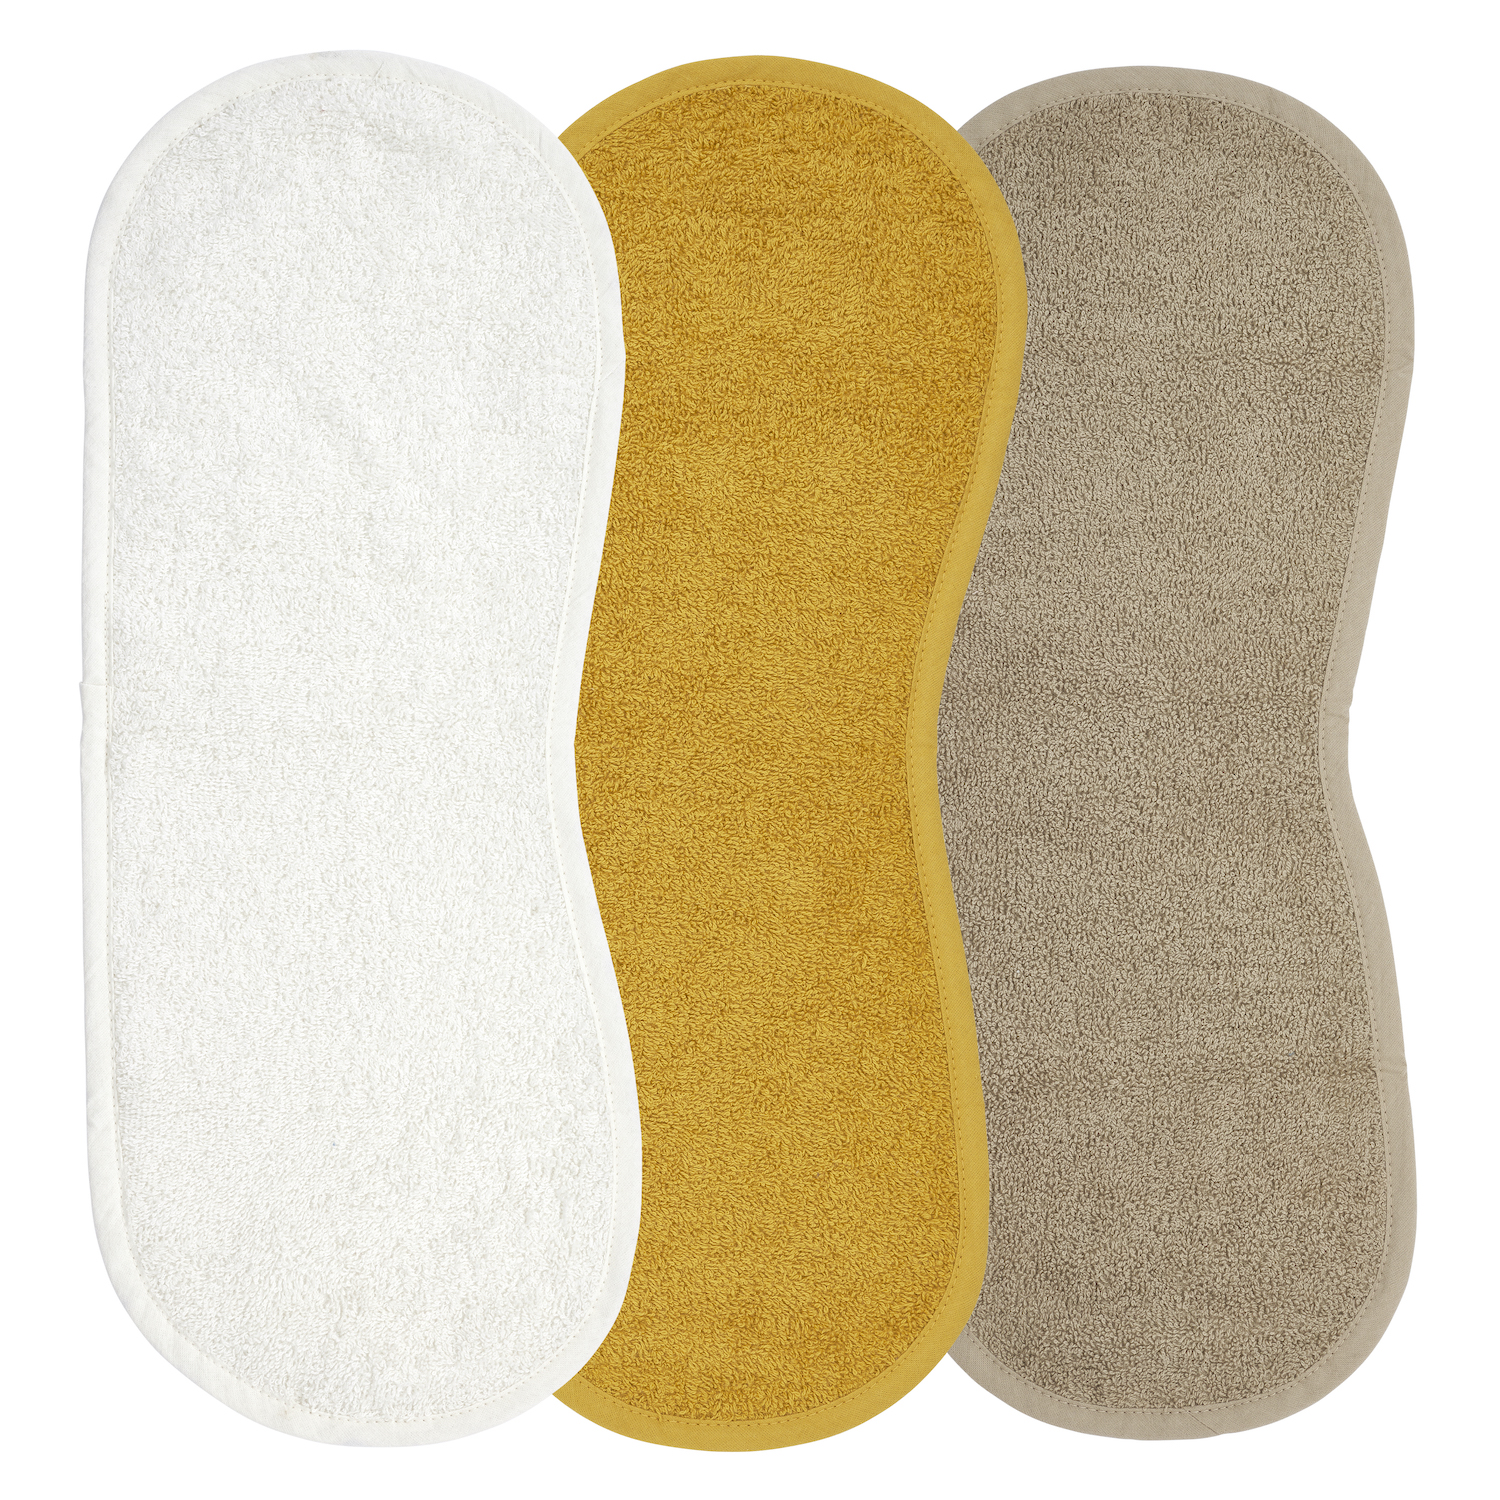 Burb cloth 3-pack terry Uni - offwhite/honey gold/taupe - 53x20cm